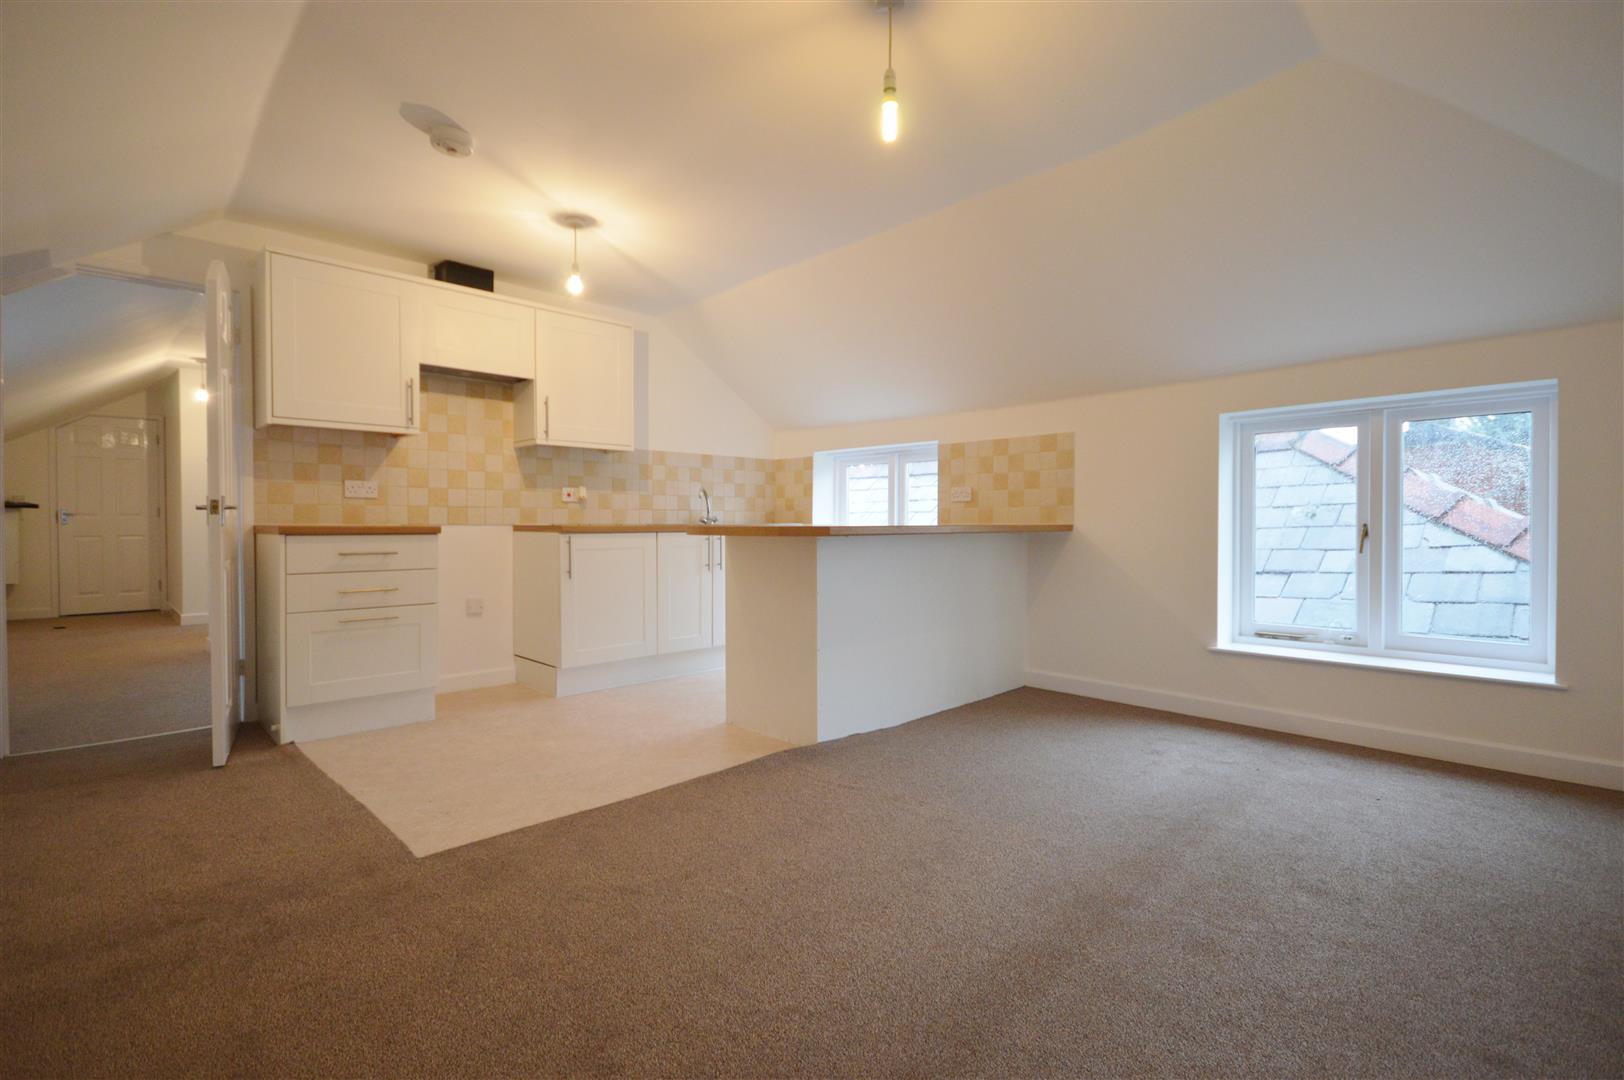 2 bed flat to rent in Merchant House, Leominster - Property Image 1